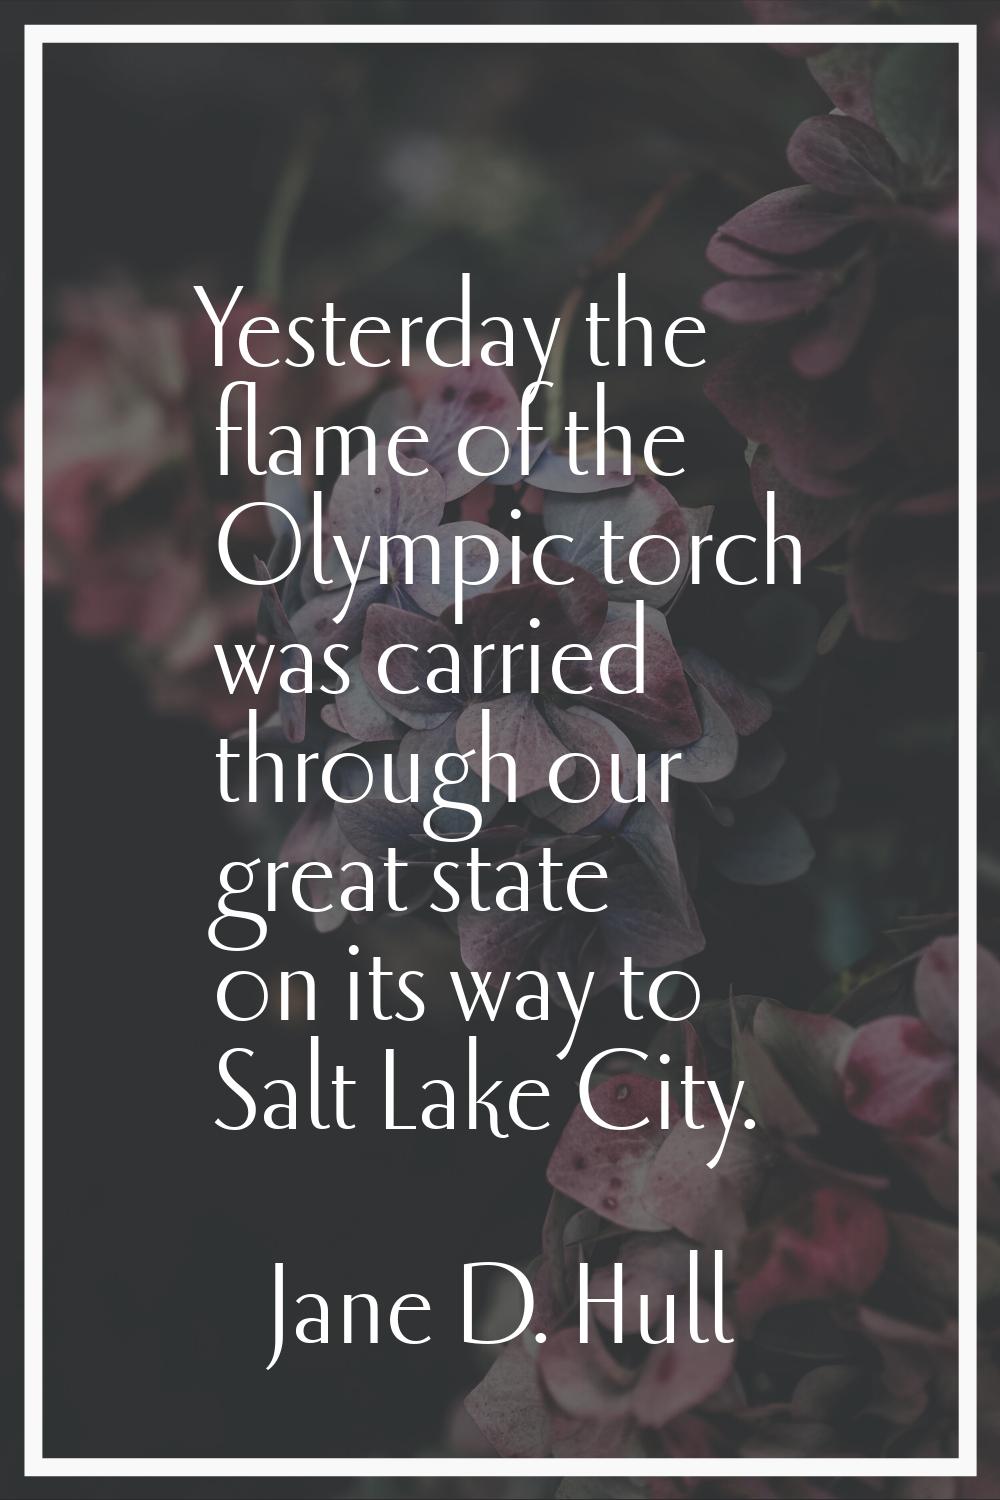 Yesterday the flame of the Olympic torch was carried through our great state on its way to Salt Lak